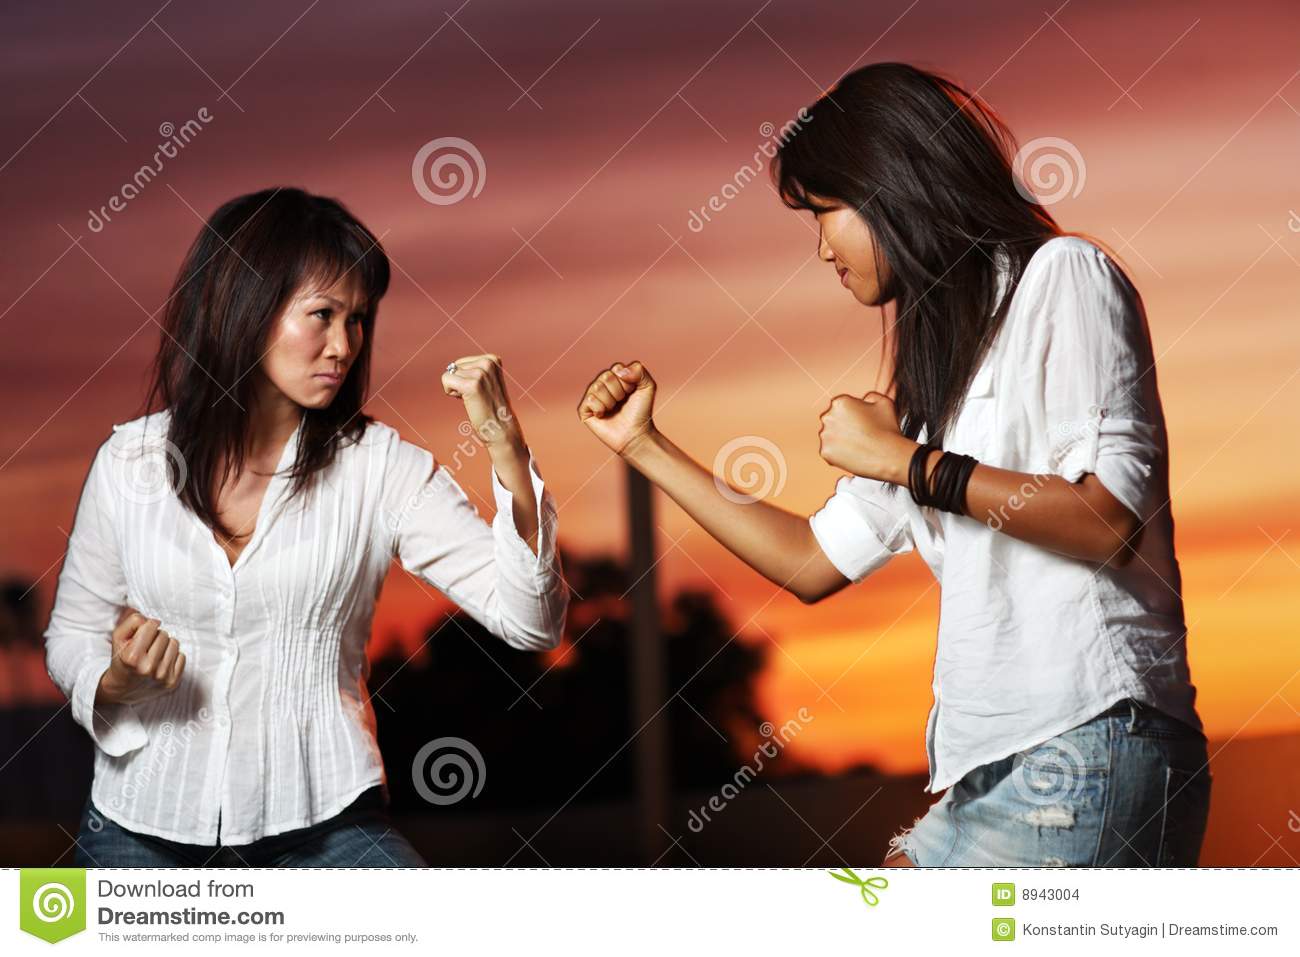 Fighting Women Stock Images   Image  8943004